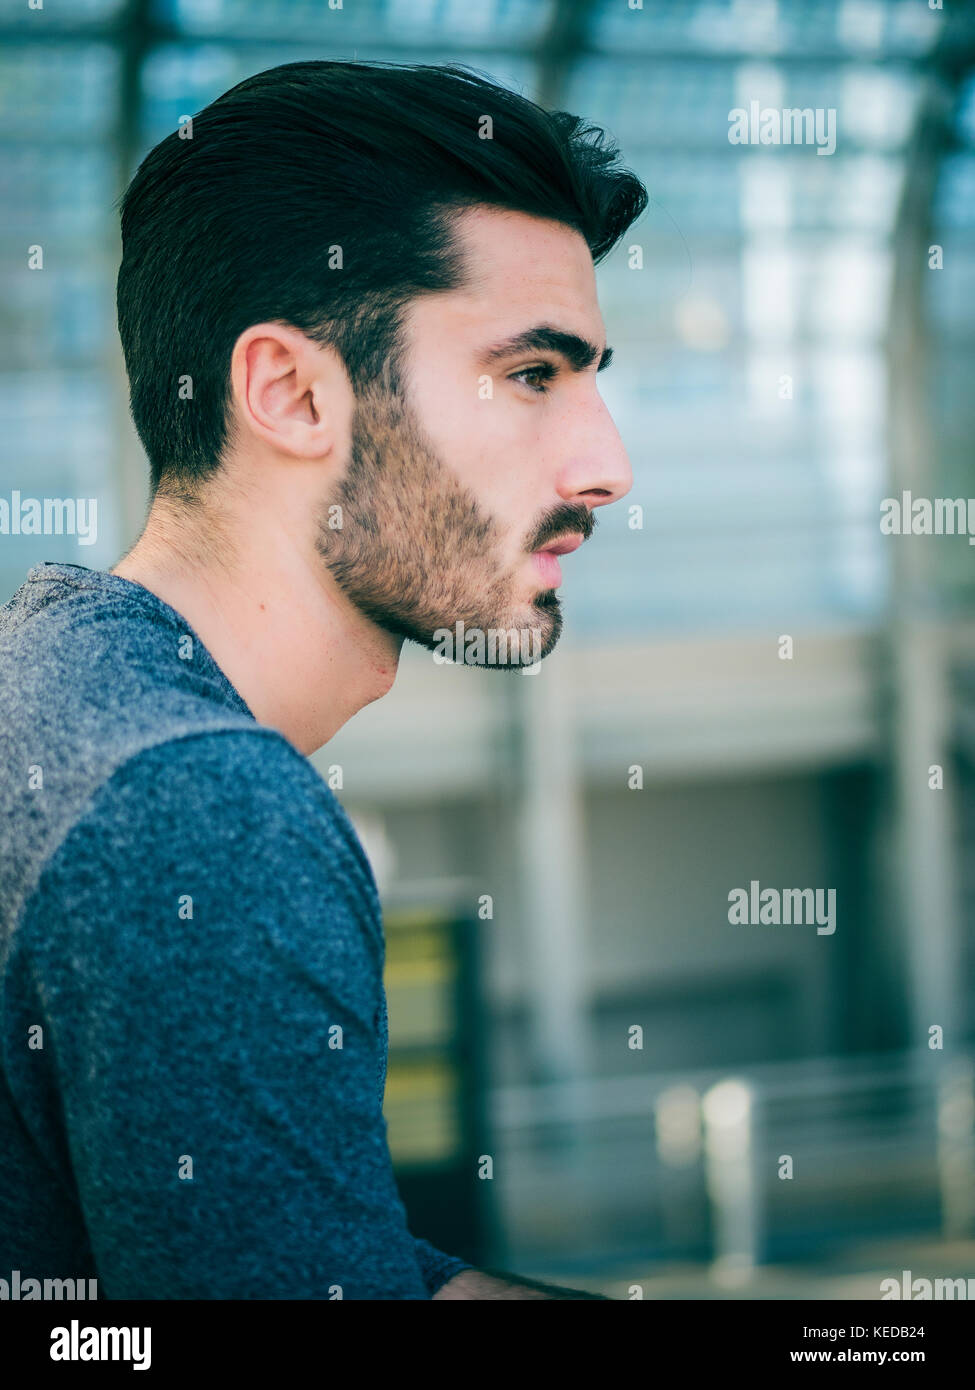 Handsome young man profile Stock Photo